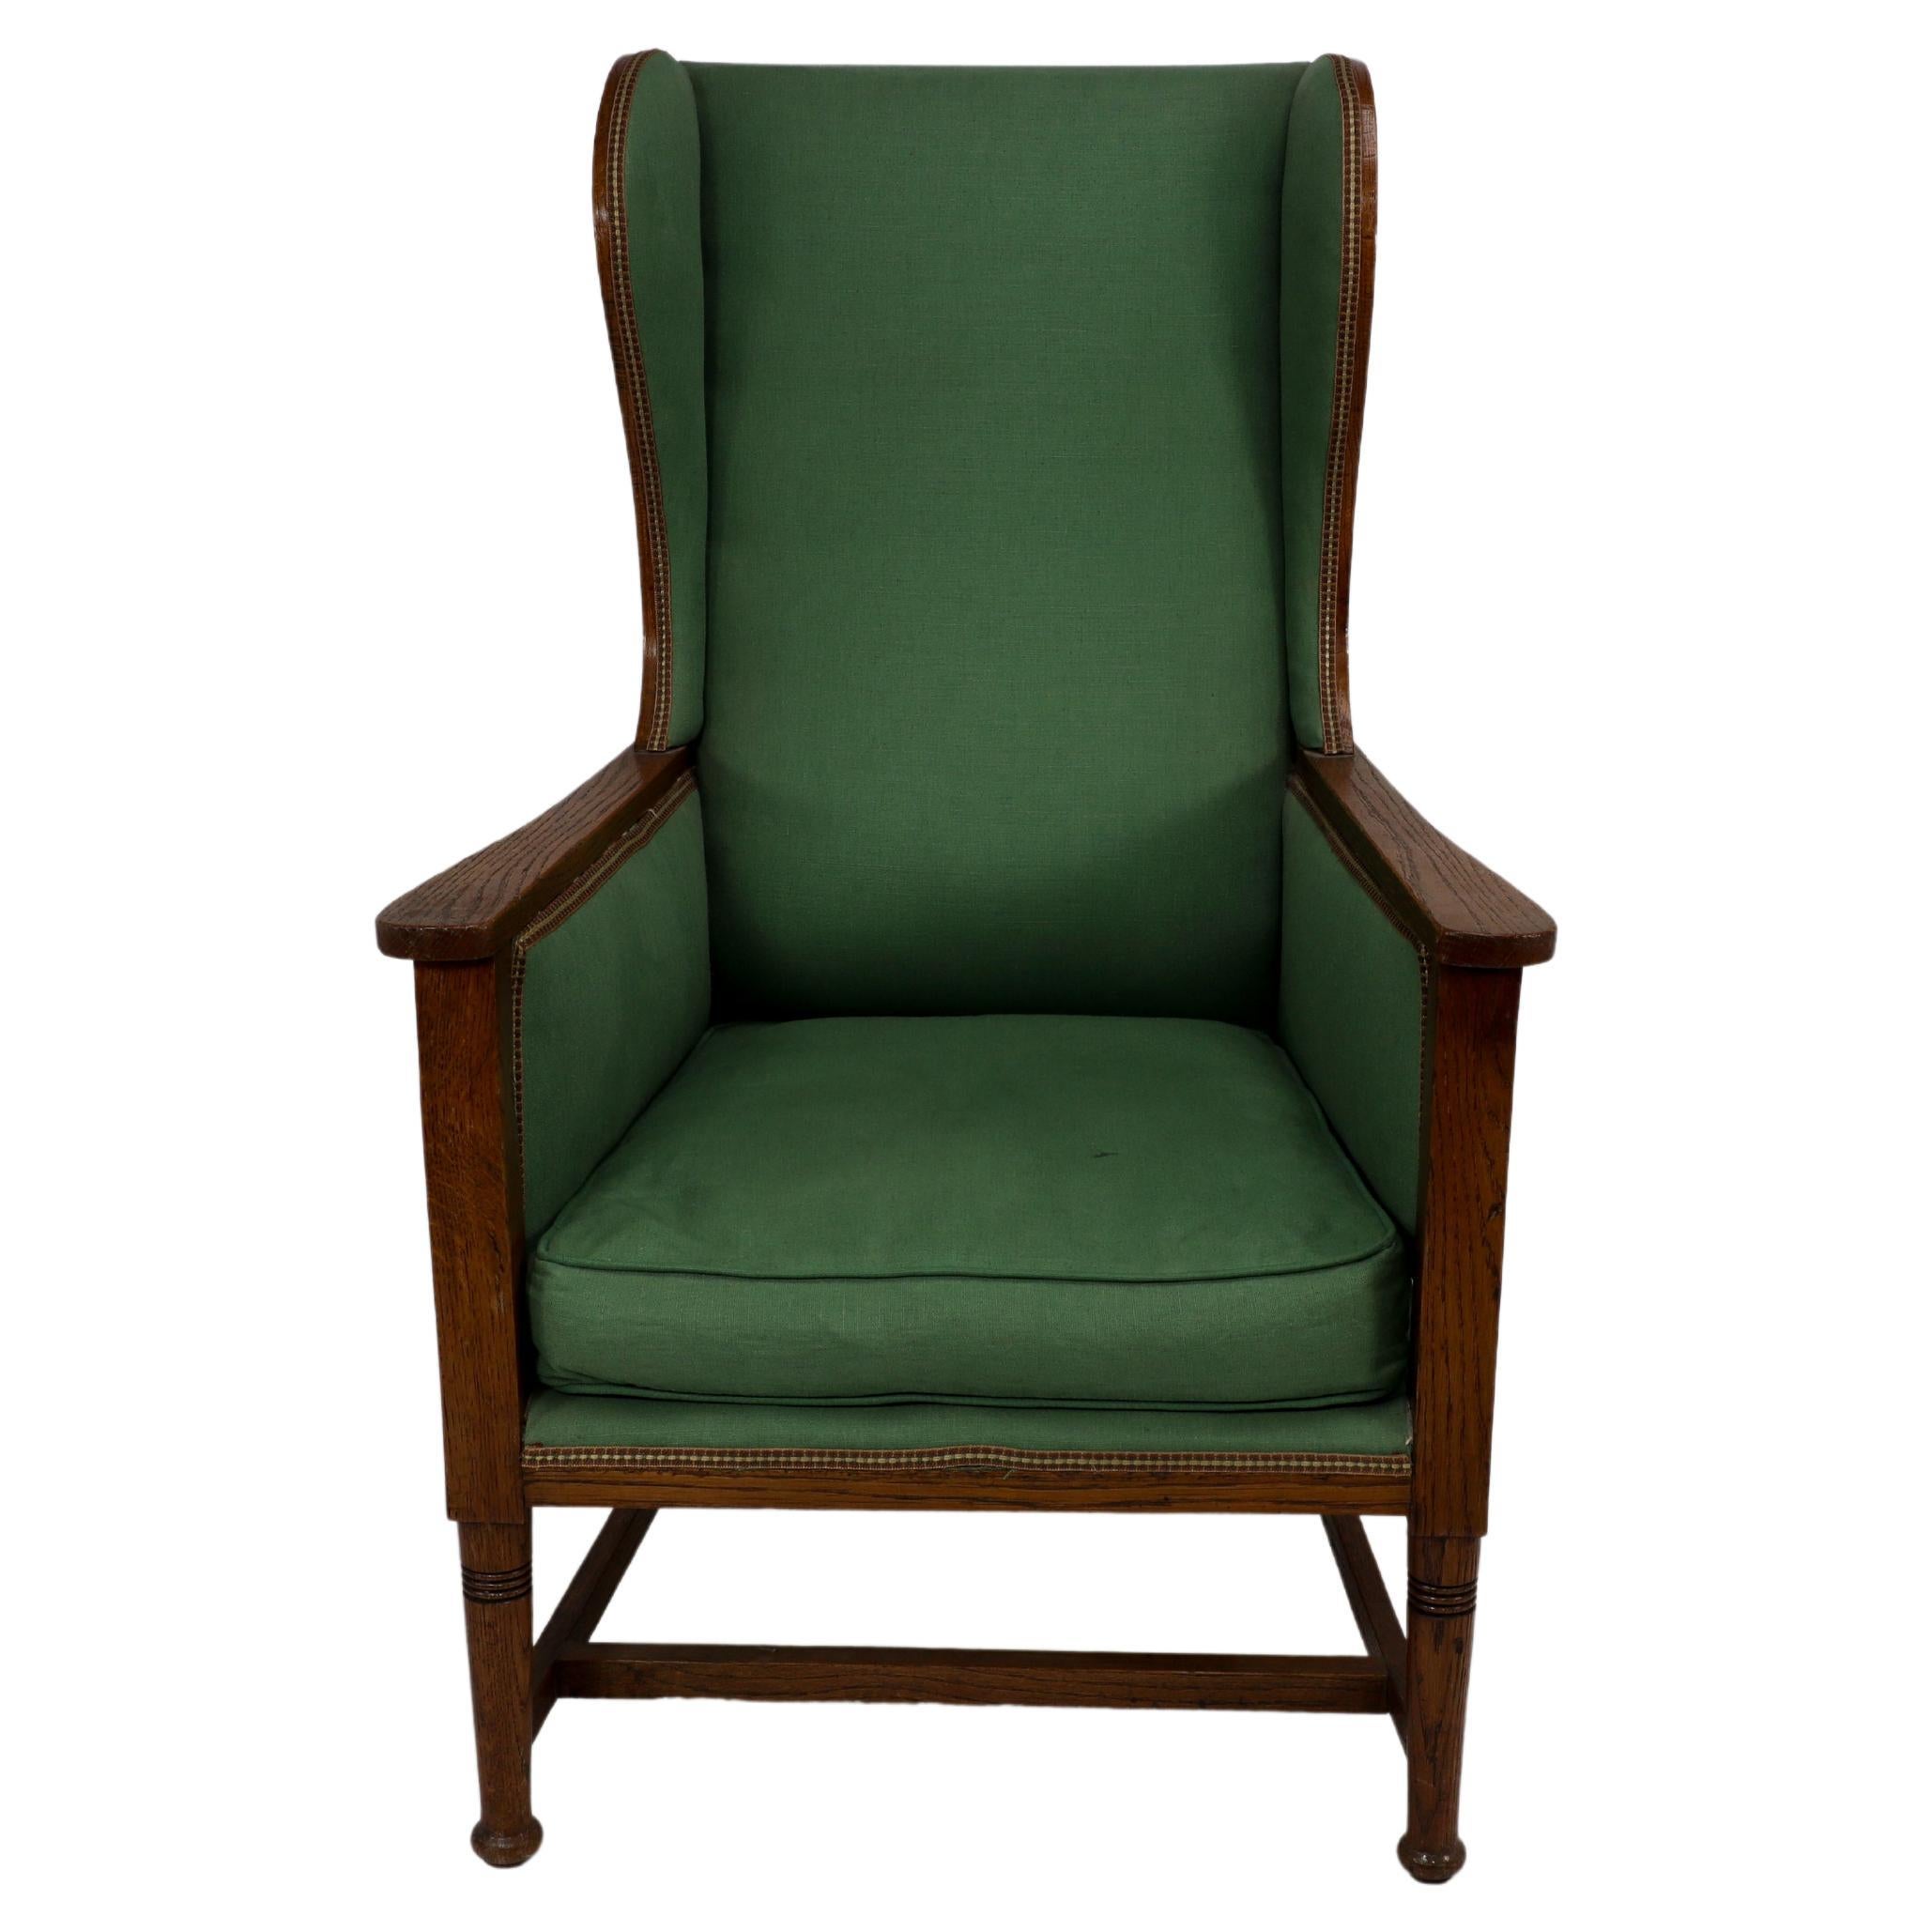 Walter Skull High Wycombe. An Arts and Crafts oak wing back upholstered armchair with lovely show oak to the outer wing sides. The wings curve out and follow down to meet the arms in a free flowing design. The front ring turned legs united with an H